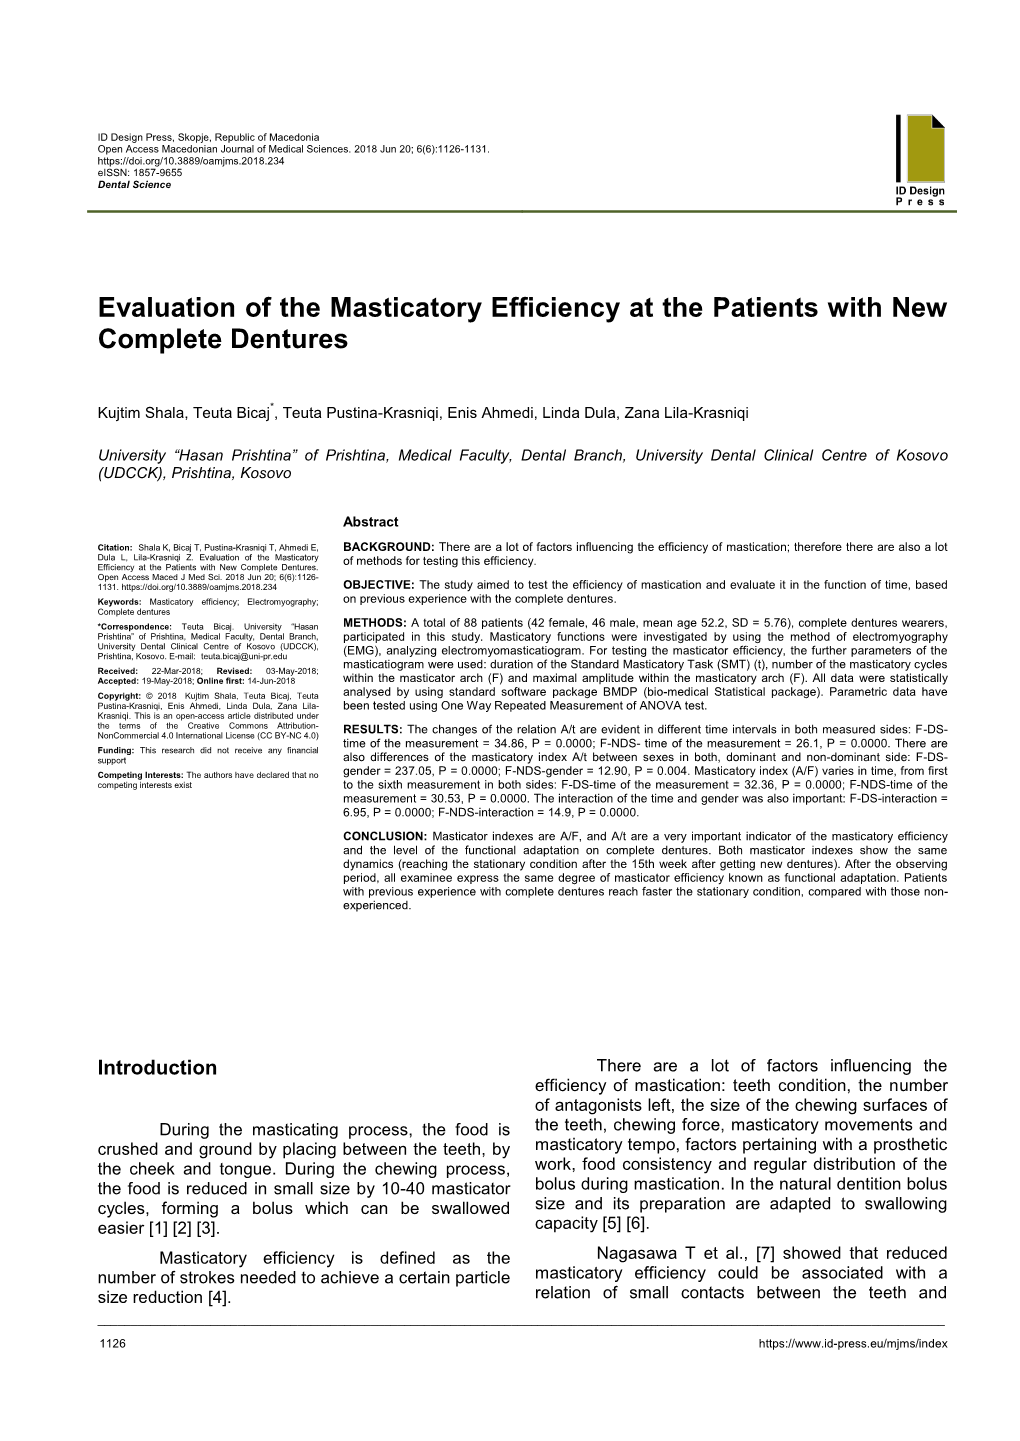 Evaluation of the Masticatory Efficiency at the Patients with New Complete Dentures